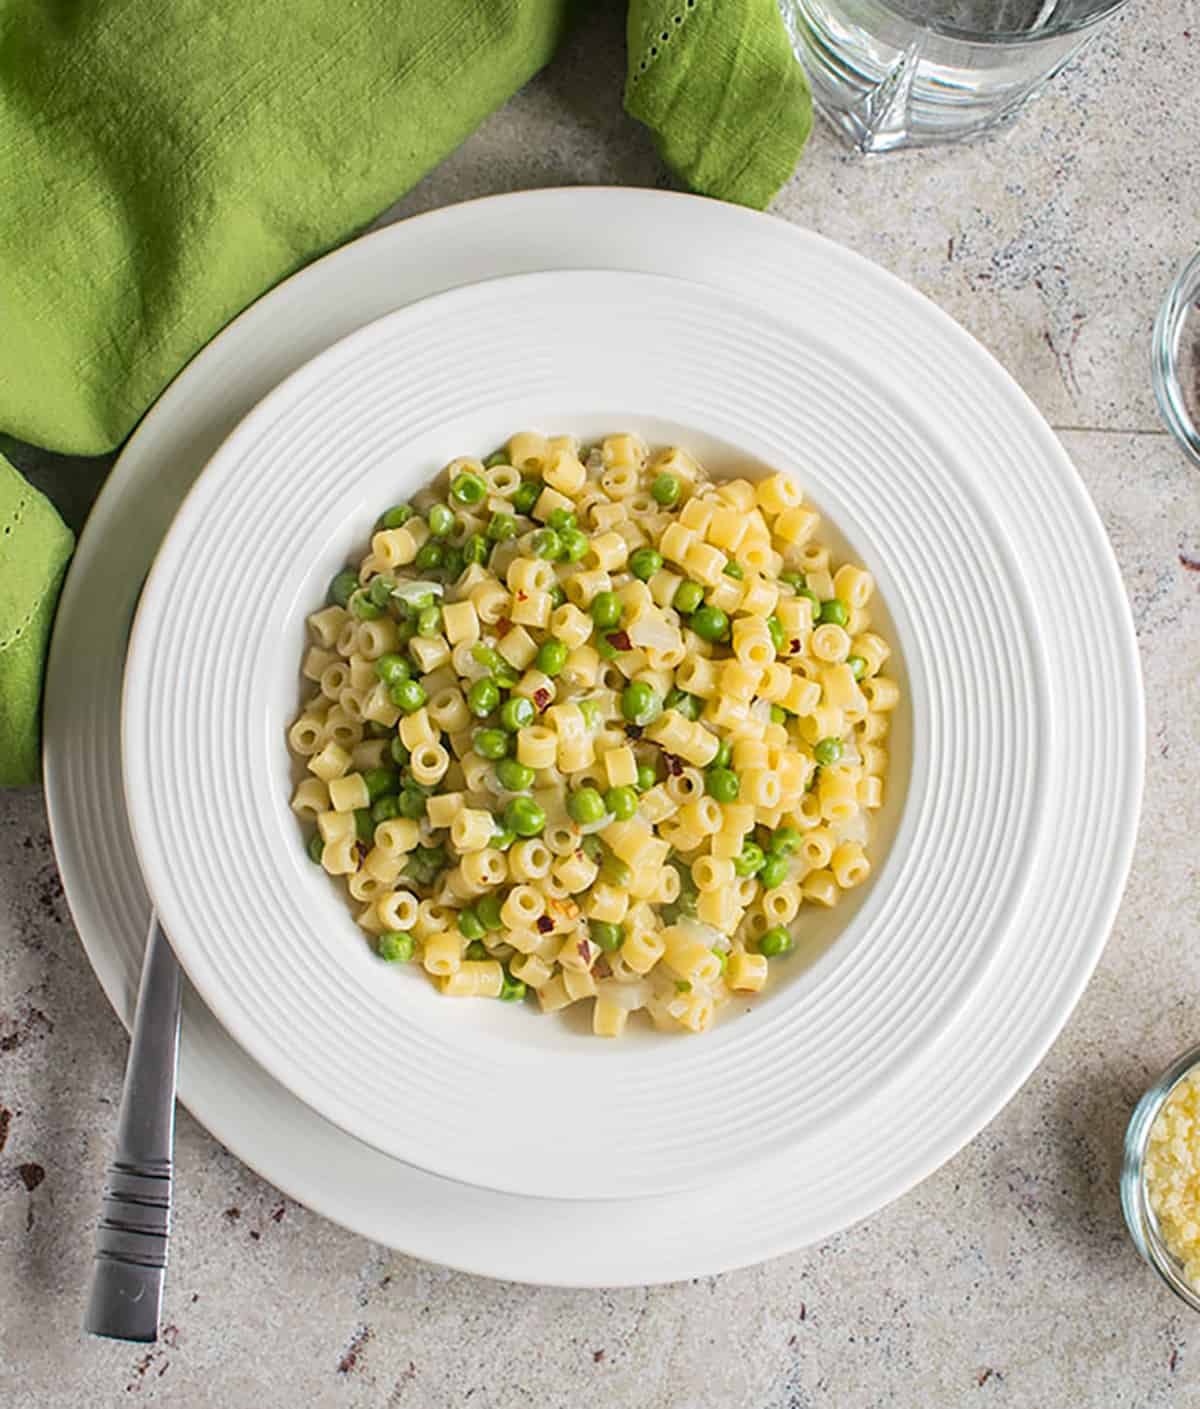 bowl of pasta with peas on white plate with green napkin